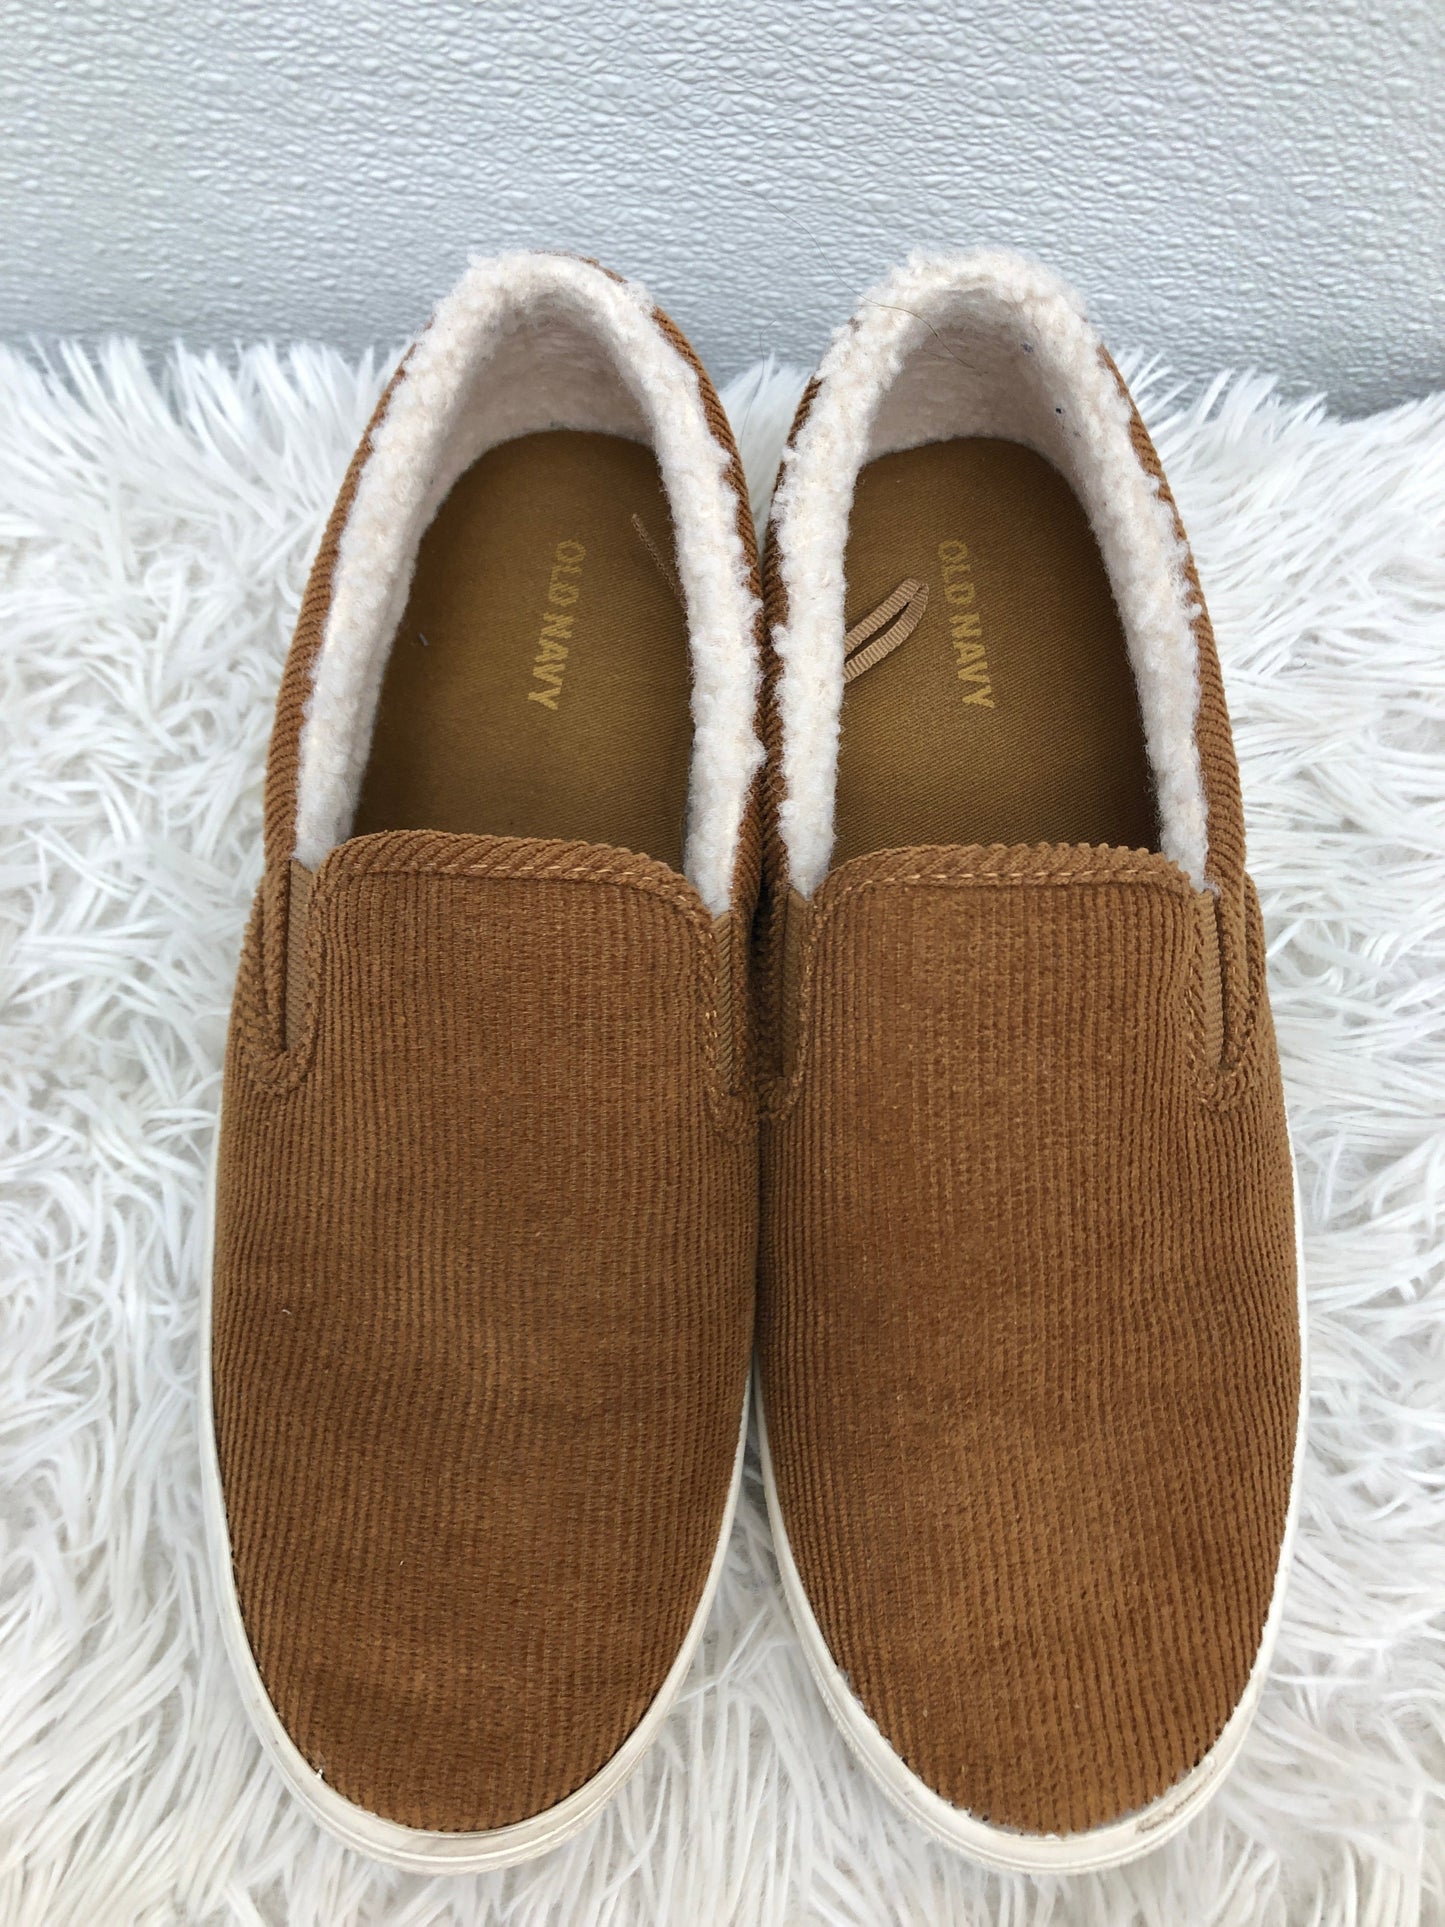 Shoes Flats Mule & Slide By Old Navy  Size: 8